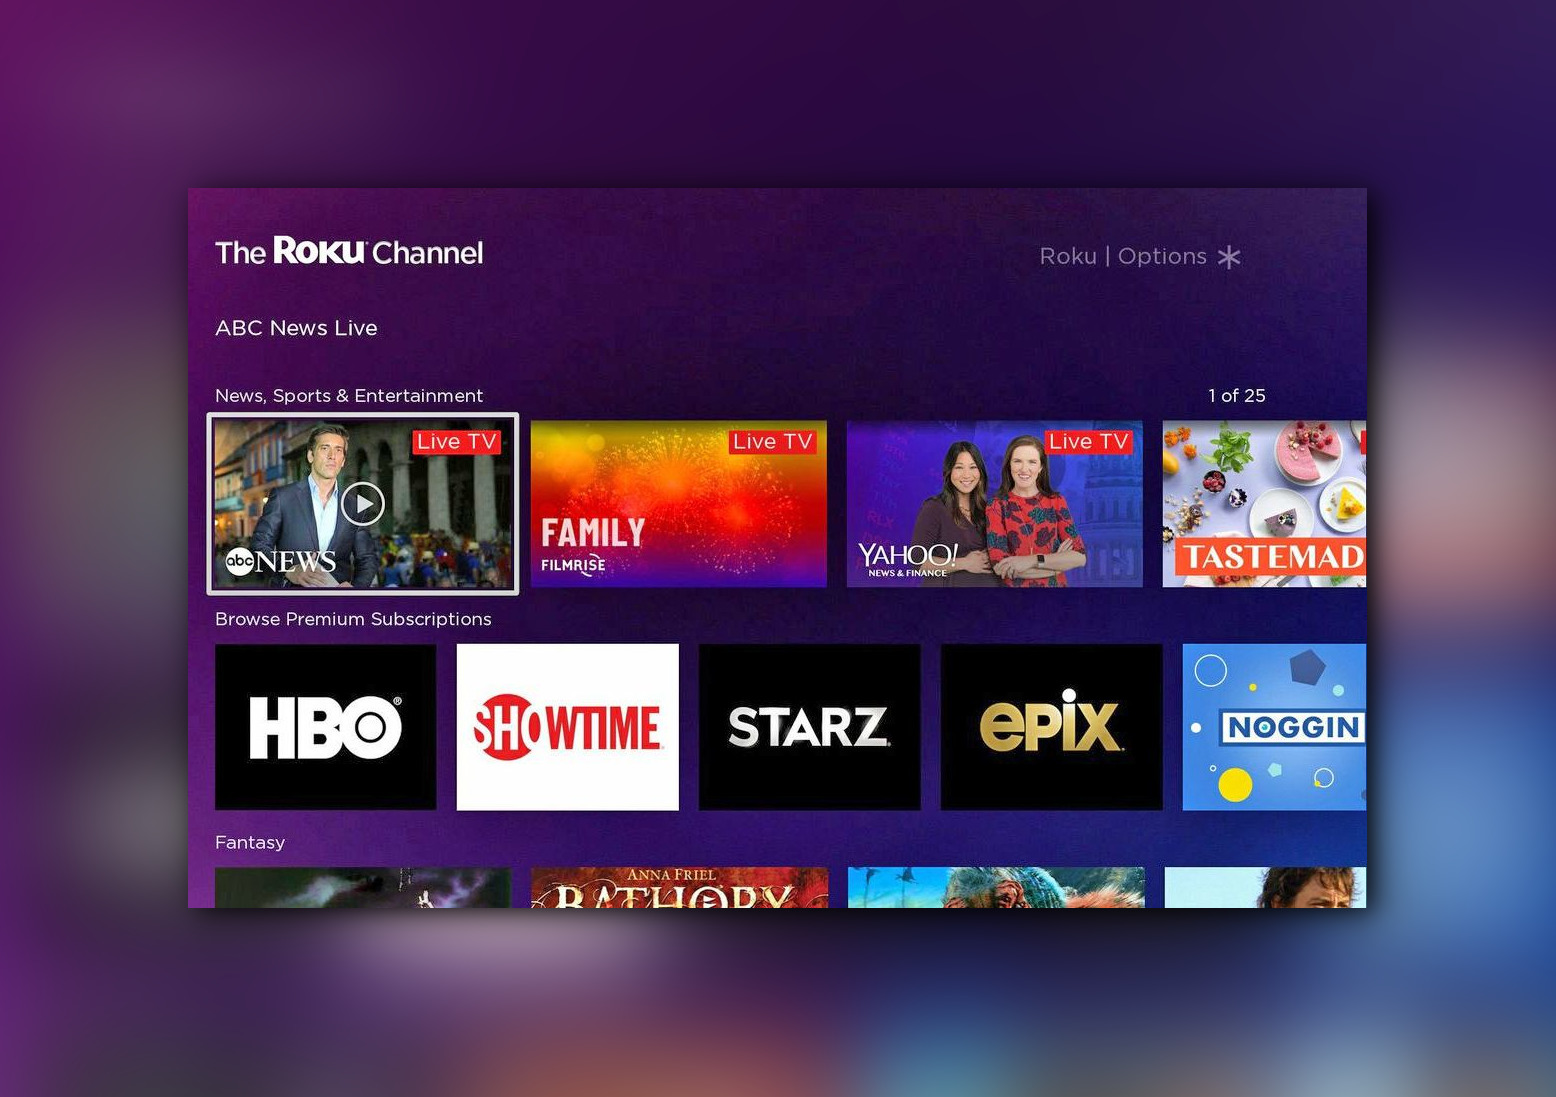 Top 10: The Roku Channel